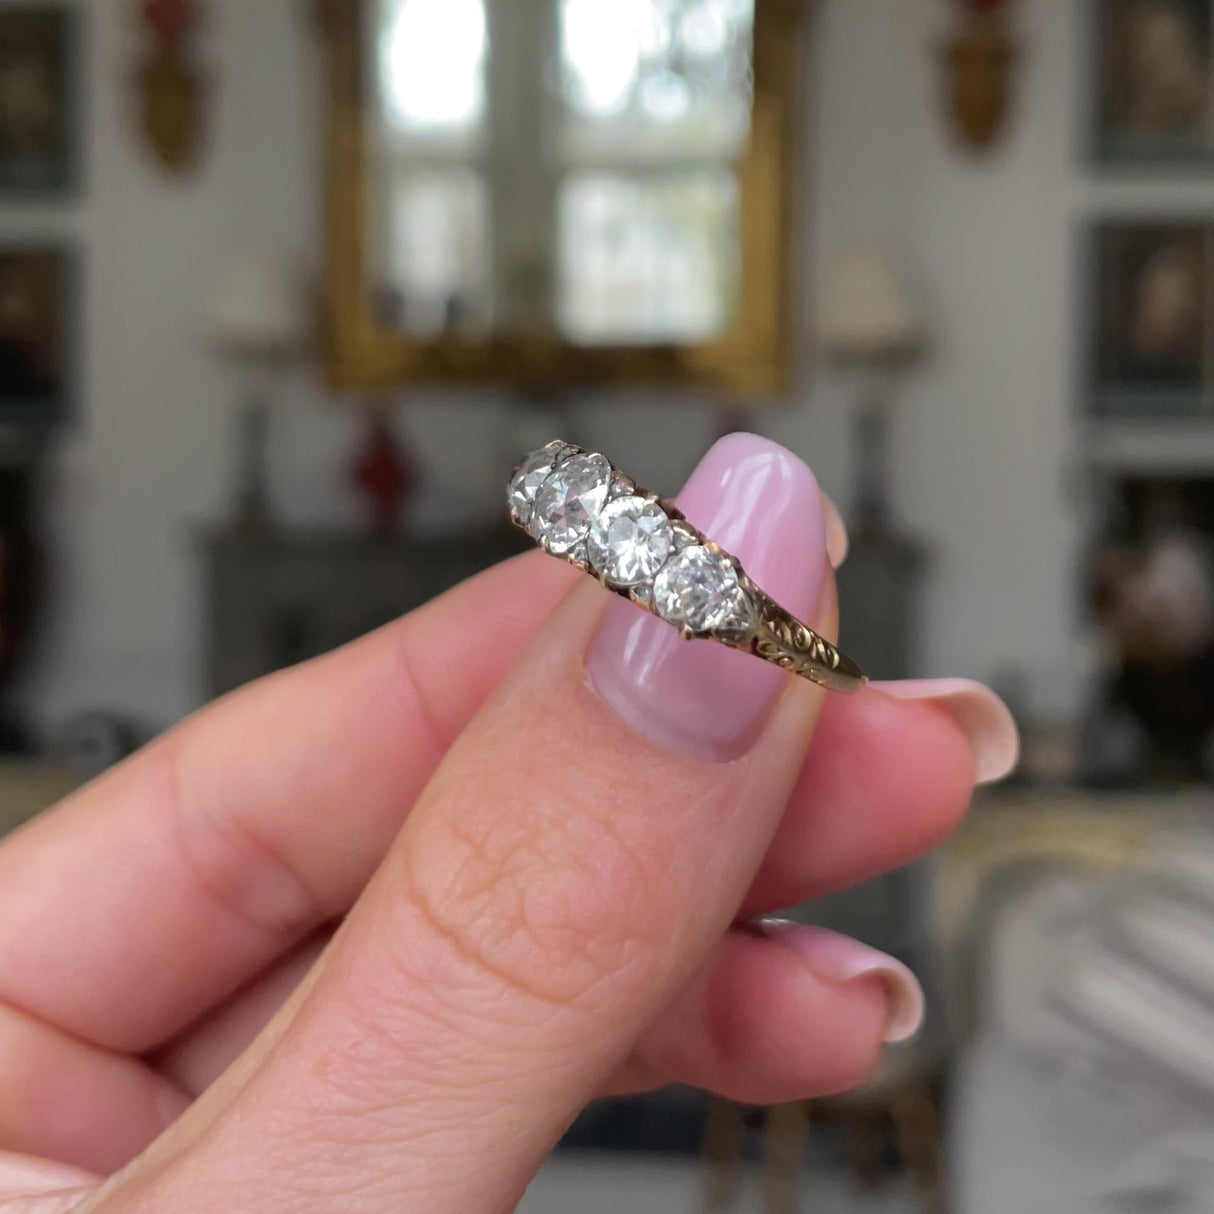 Victorian half-hoop diamond engagement ring, held in fingers and rotated to give perspective.